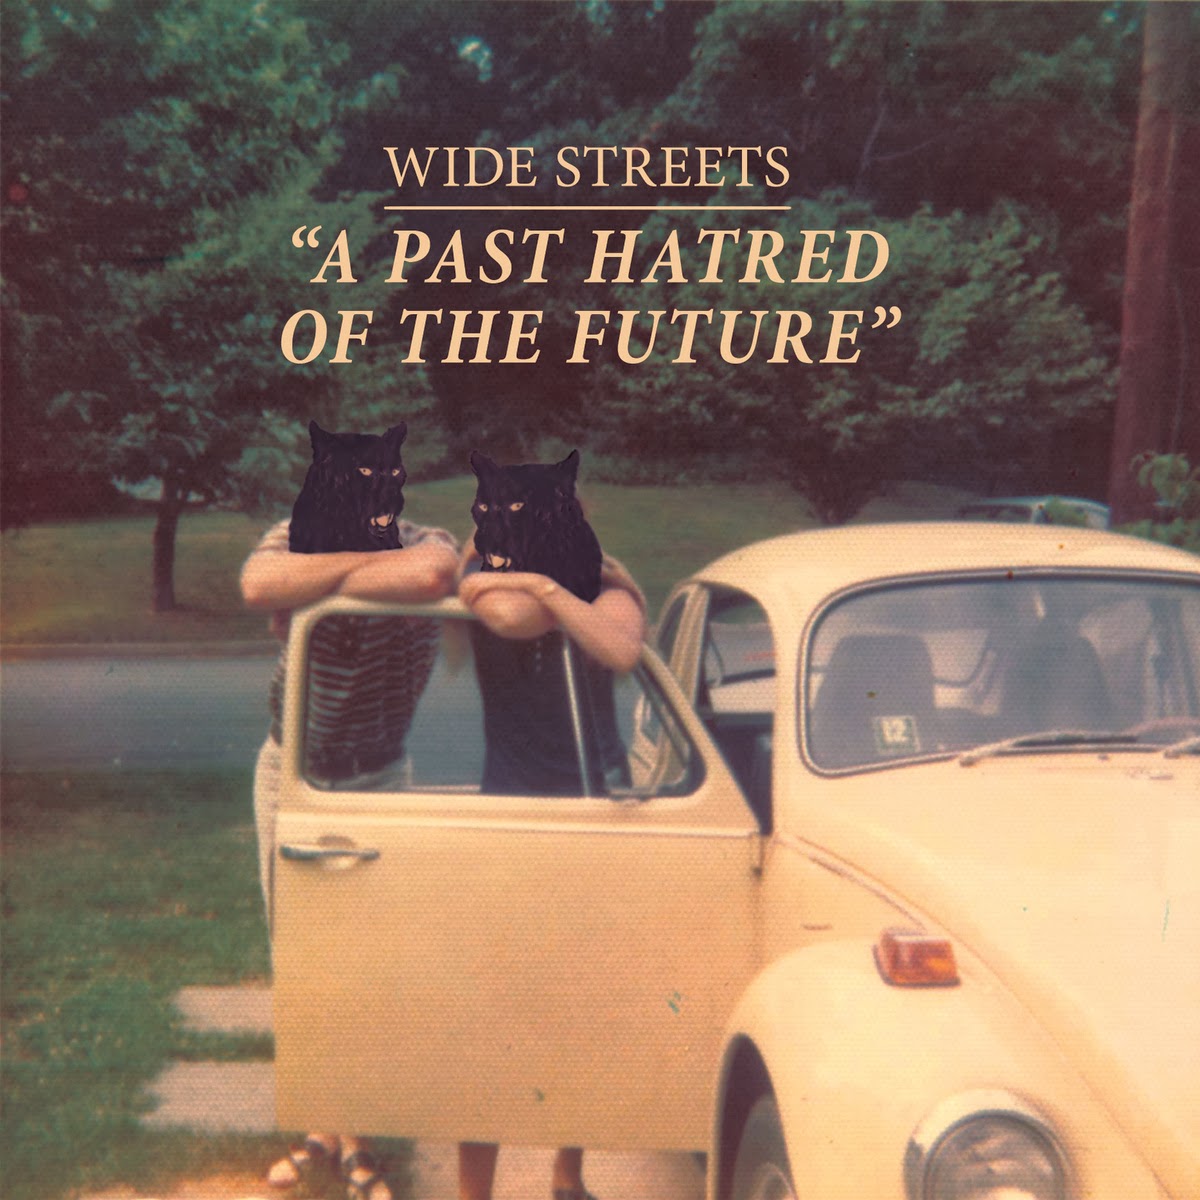 AP Album Review: Wide Streets - "A Past Hatred Of The Future" - Fanciful Art Rock Fulfills a Dream